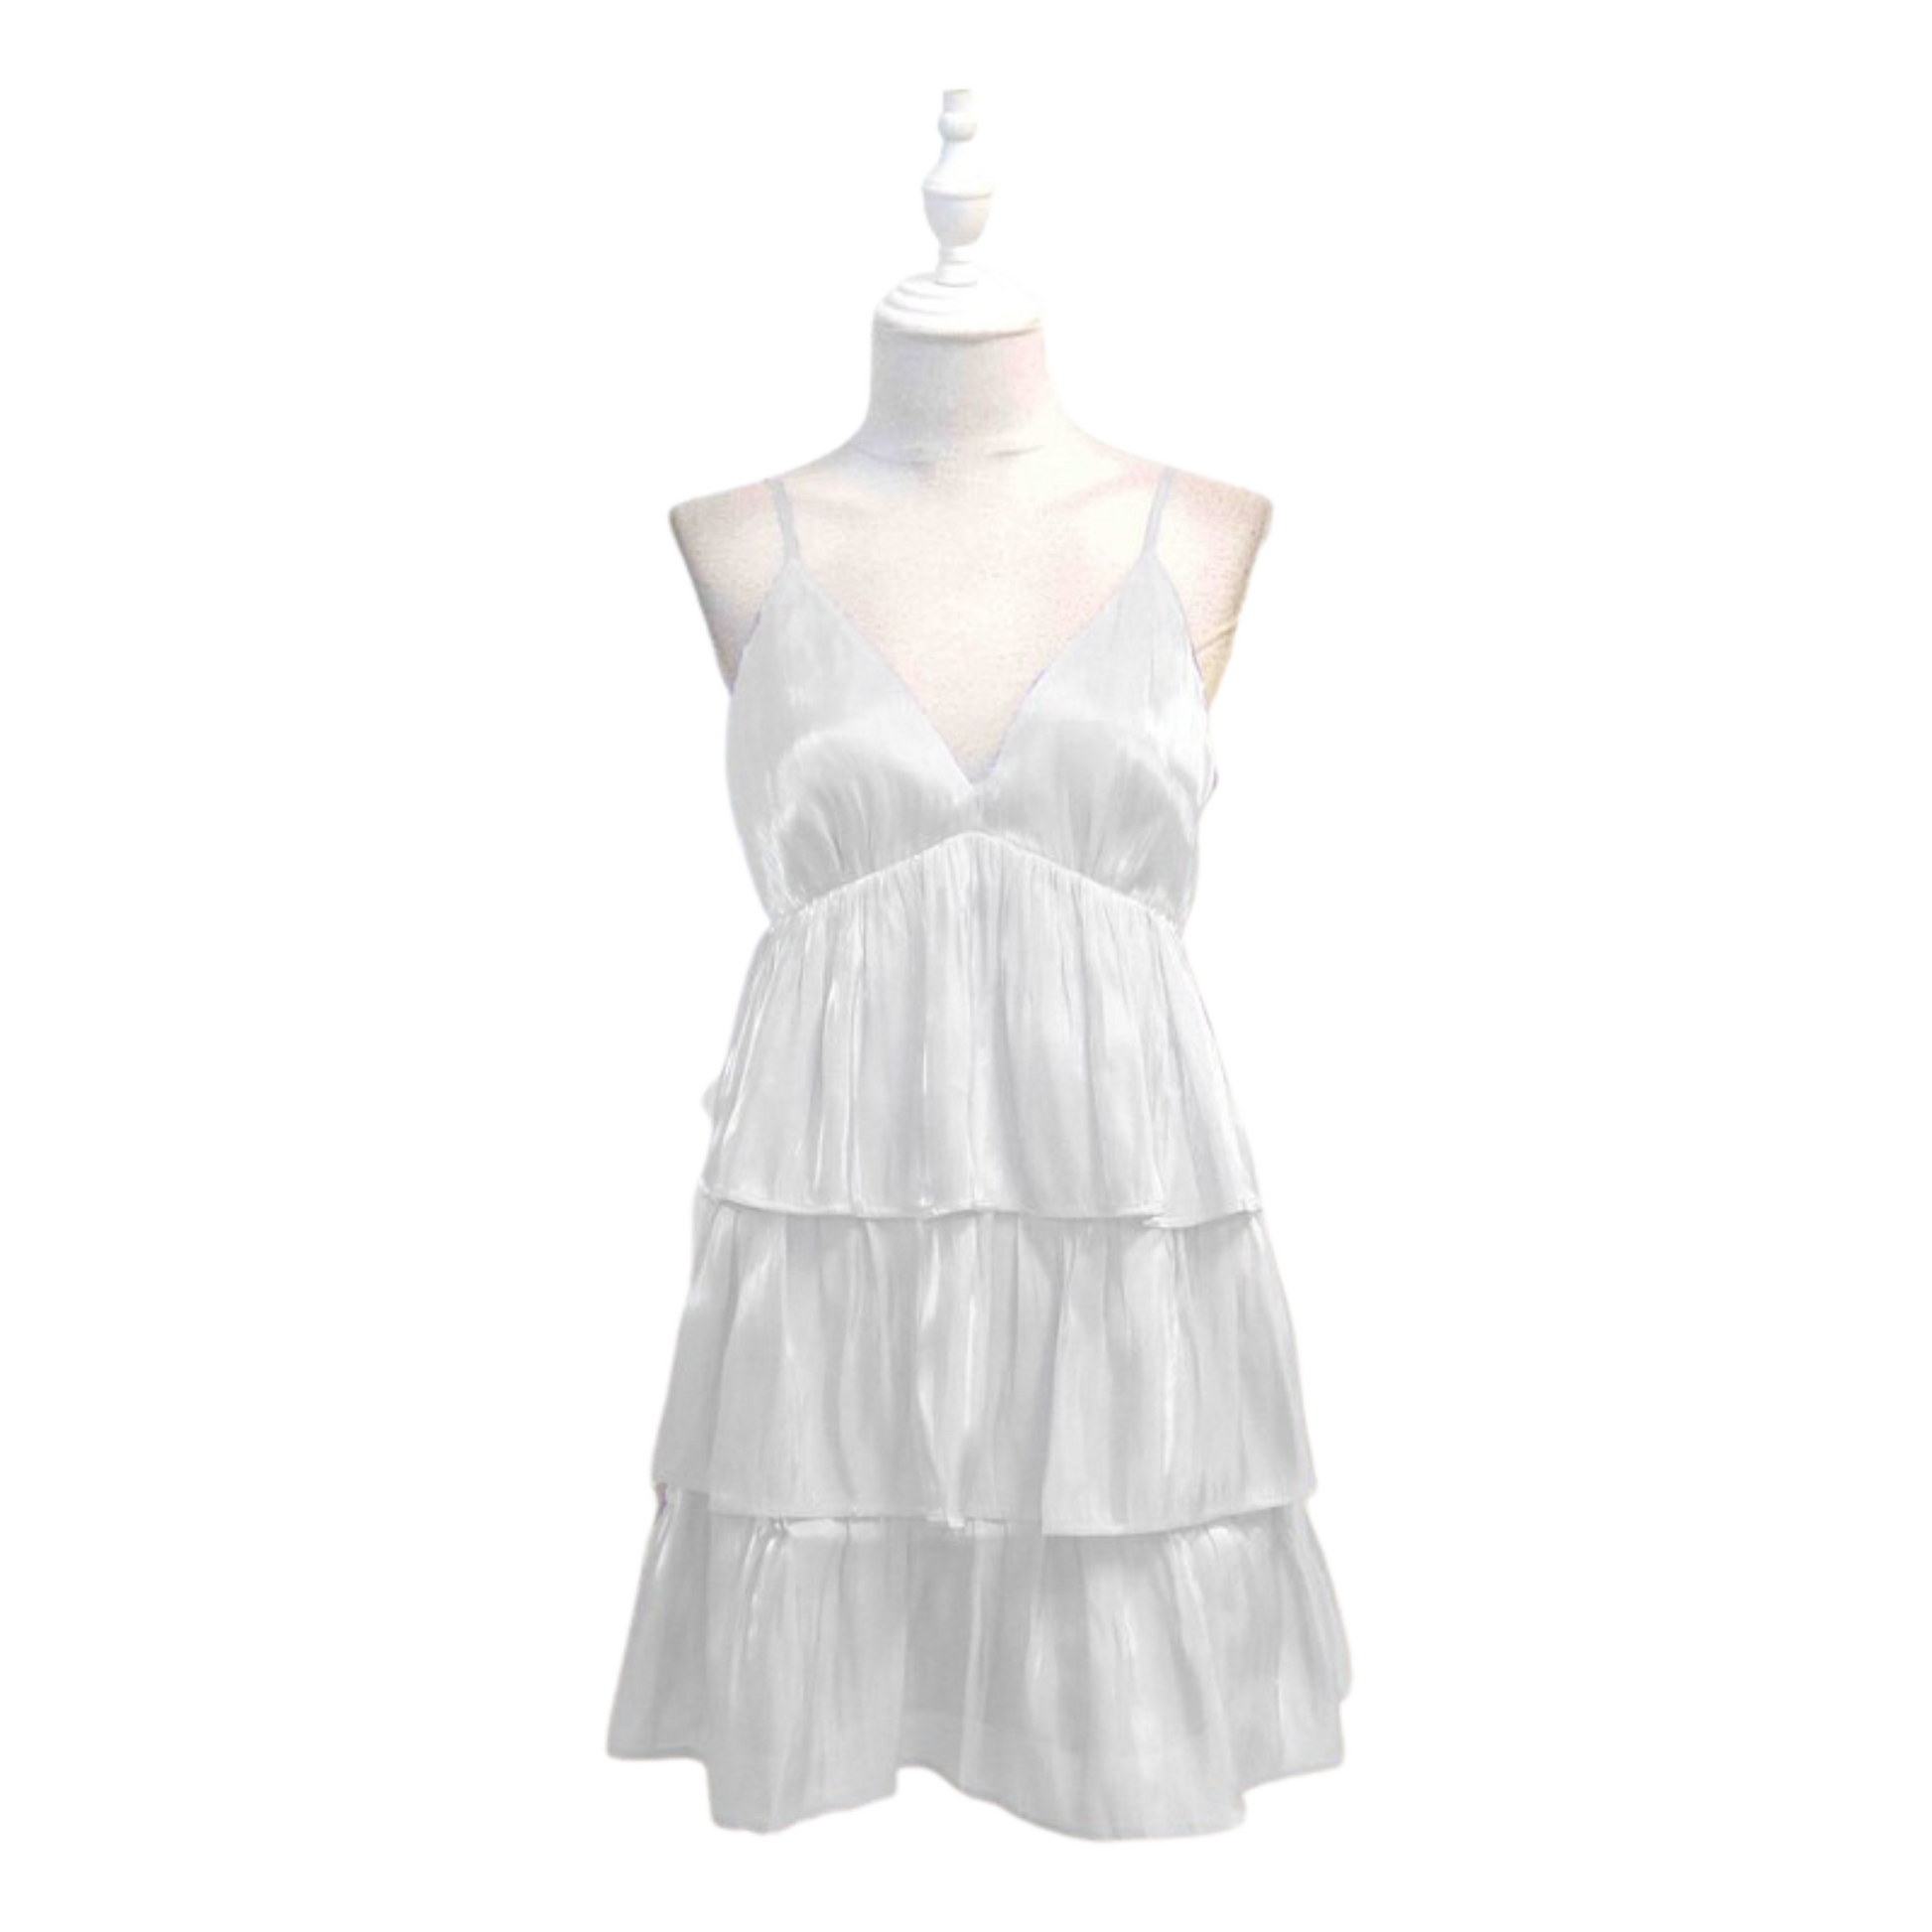 Look your best in this Flirty Tank Dress. Crafted from lightweight fabric with a tiered silhouette, this mini dress is perfect for a night out. Its timeless white color will match any of your accessories. Let your style shine with this flirty and chic Dress.